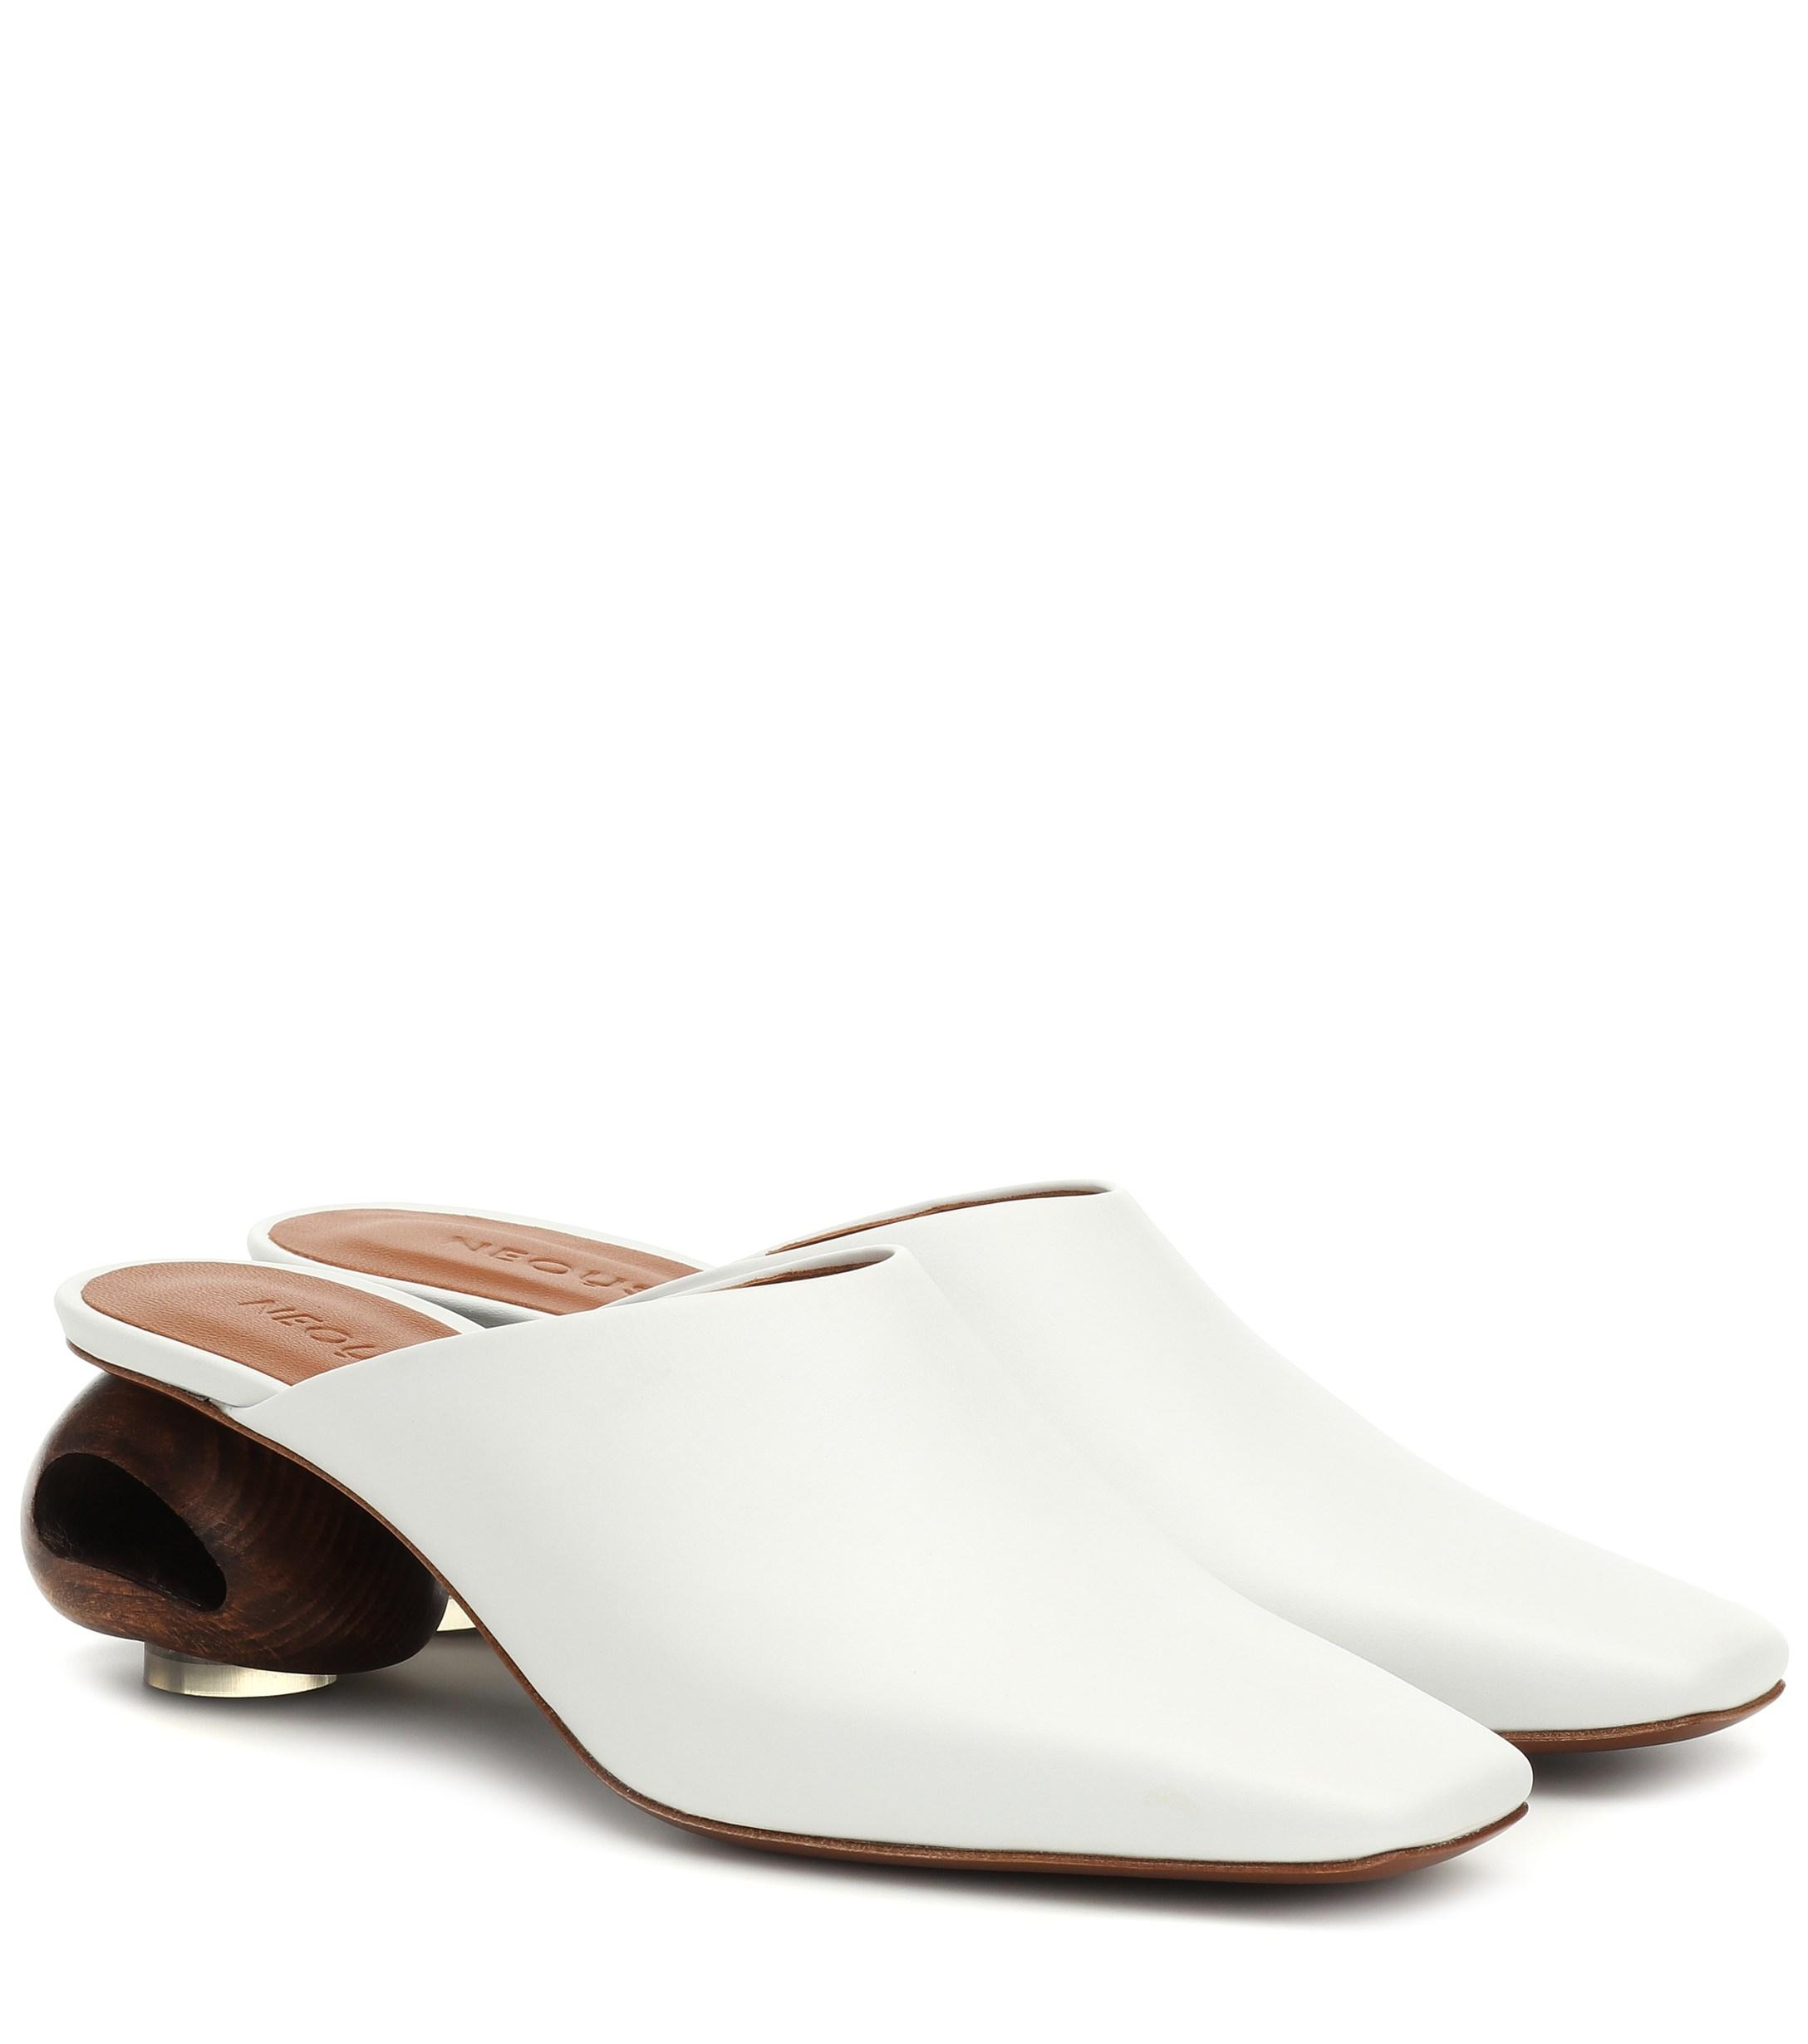 Neous Sobralia Leather Mules in White - Lyst